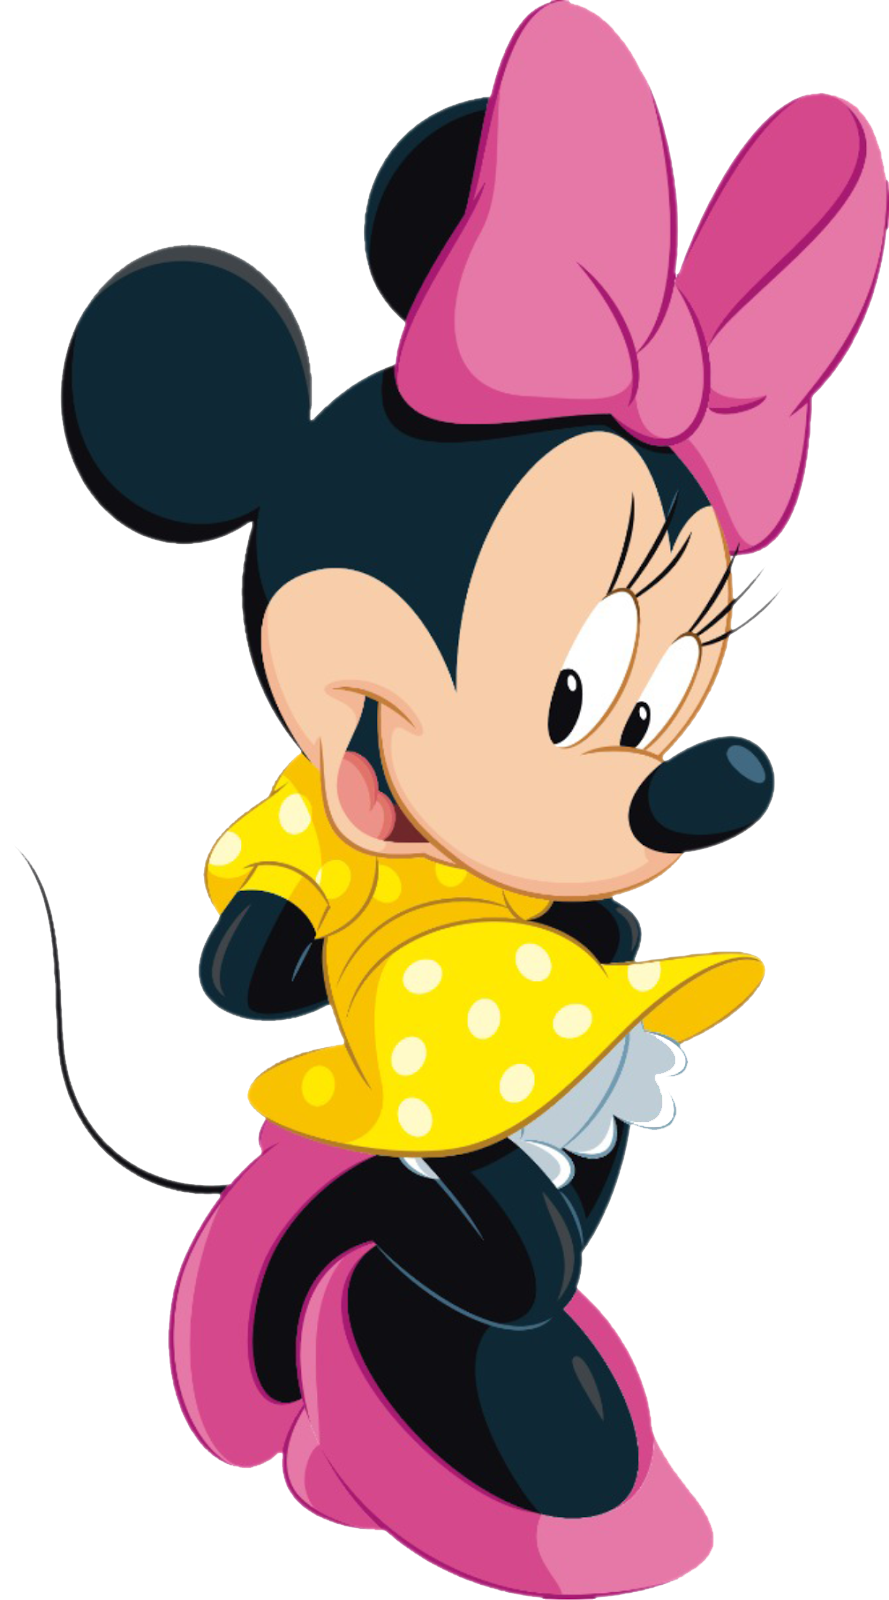 Minnie Mouse PNG Transparent Images | PNG All